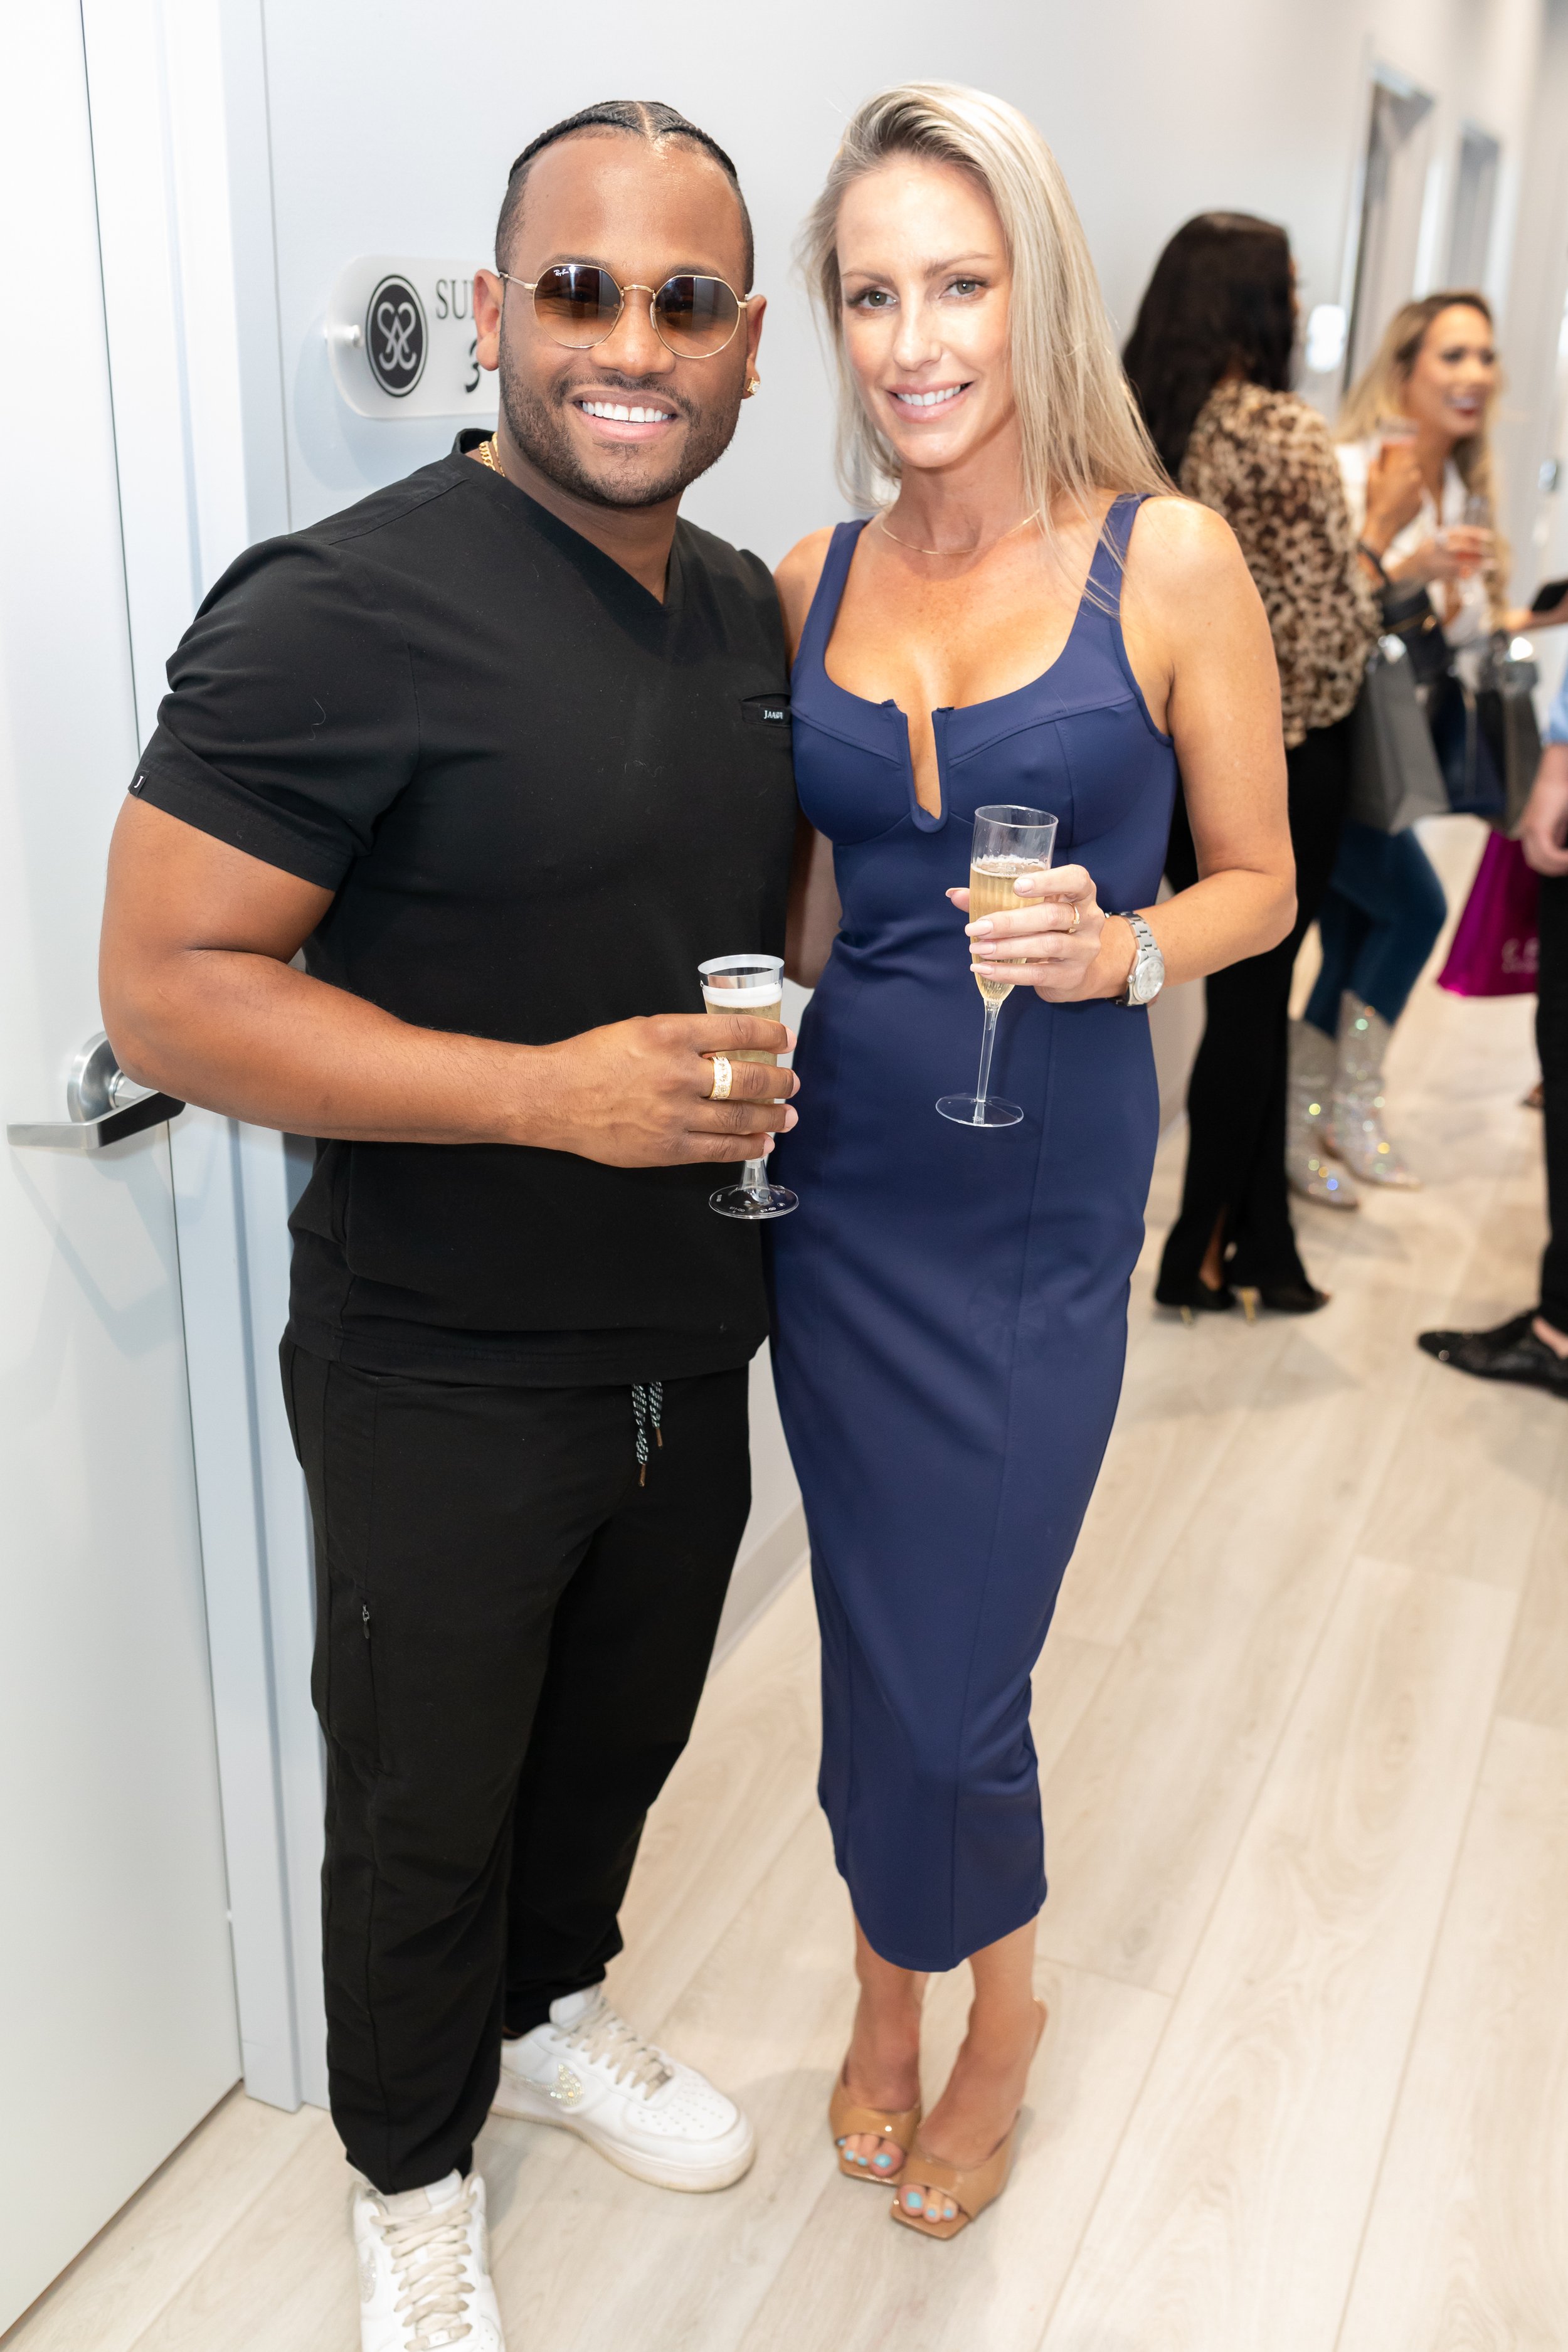 20230817-The Luxe List Atlanta-Southern Surgical Arts Beauty Bar Grand Opening-THU-BC-172.jpg (Copy)